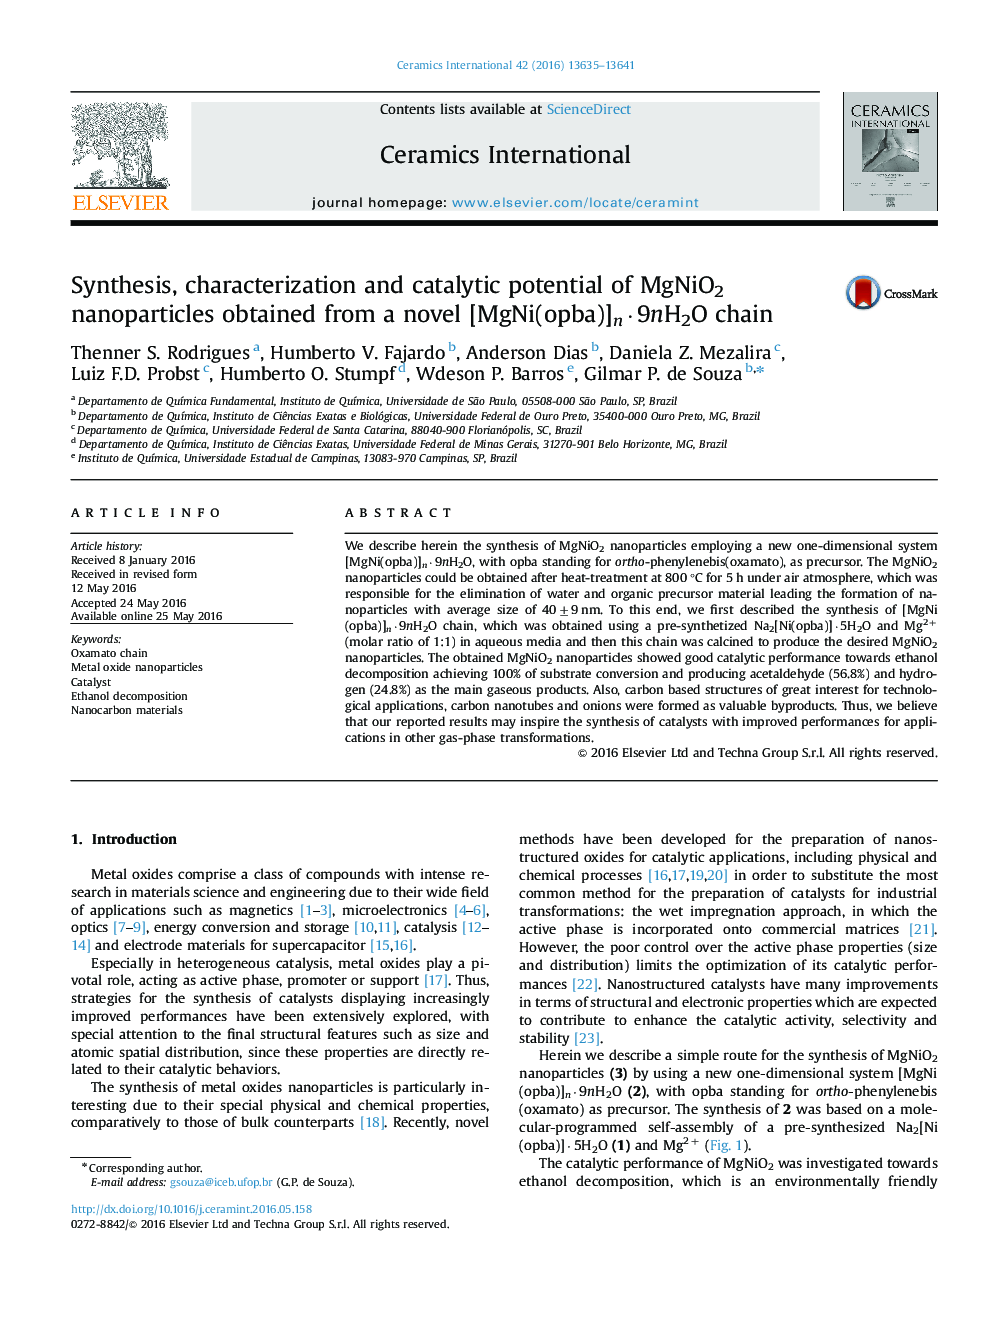 Synthesis, characterization and catalytic potential of MgNiO2 nanoparticles obtained from a novel [MgNi(opba)]n·9nH2O chain